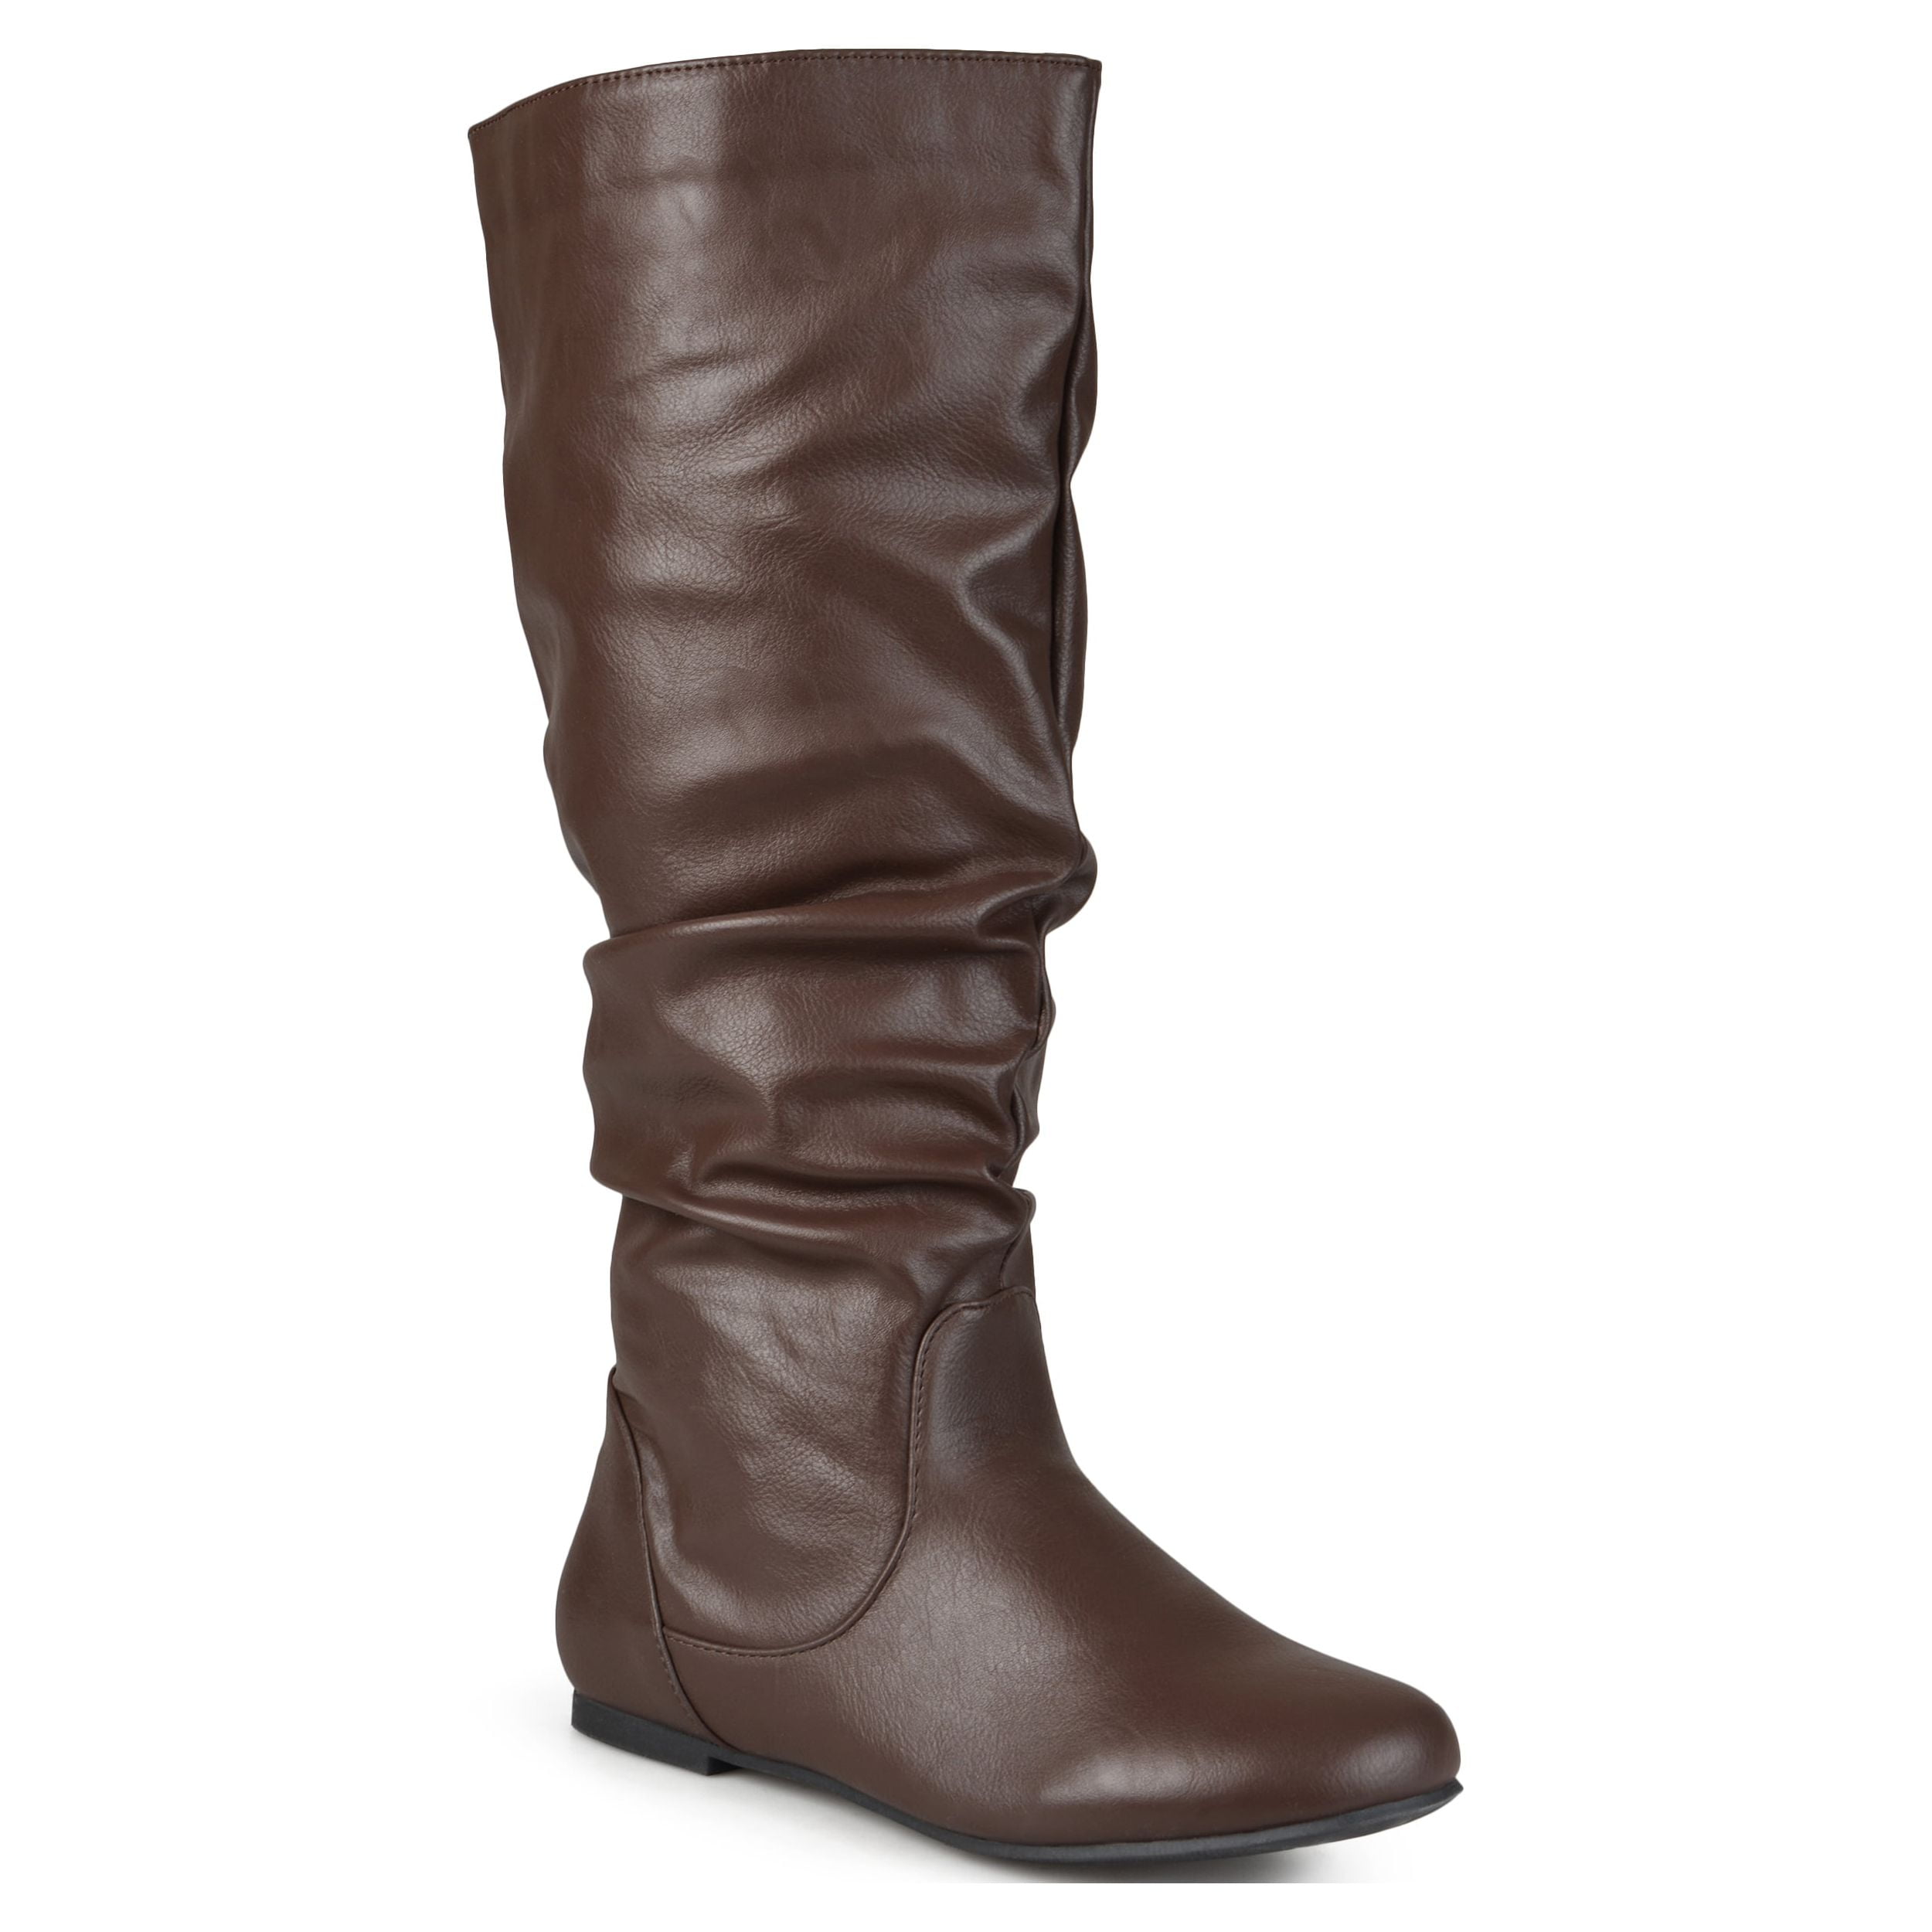 Brinley Co. Women's Extra Wide-Calf Mid-Calf Slouch Riding Boots ...